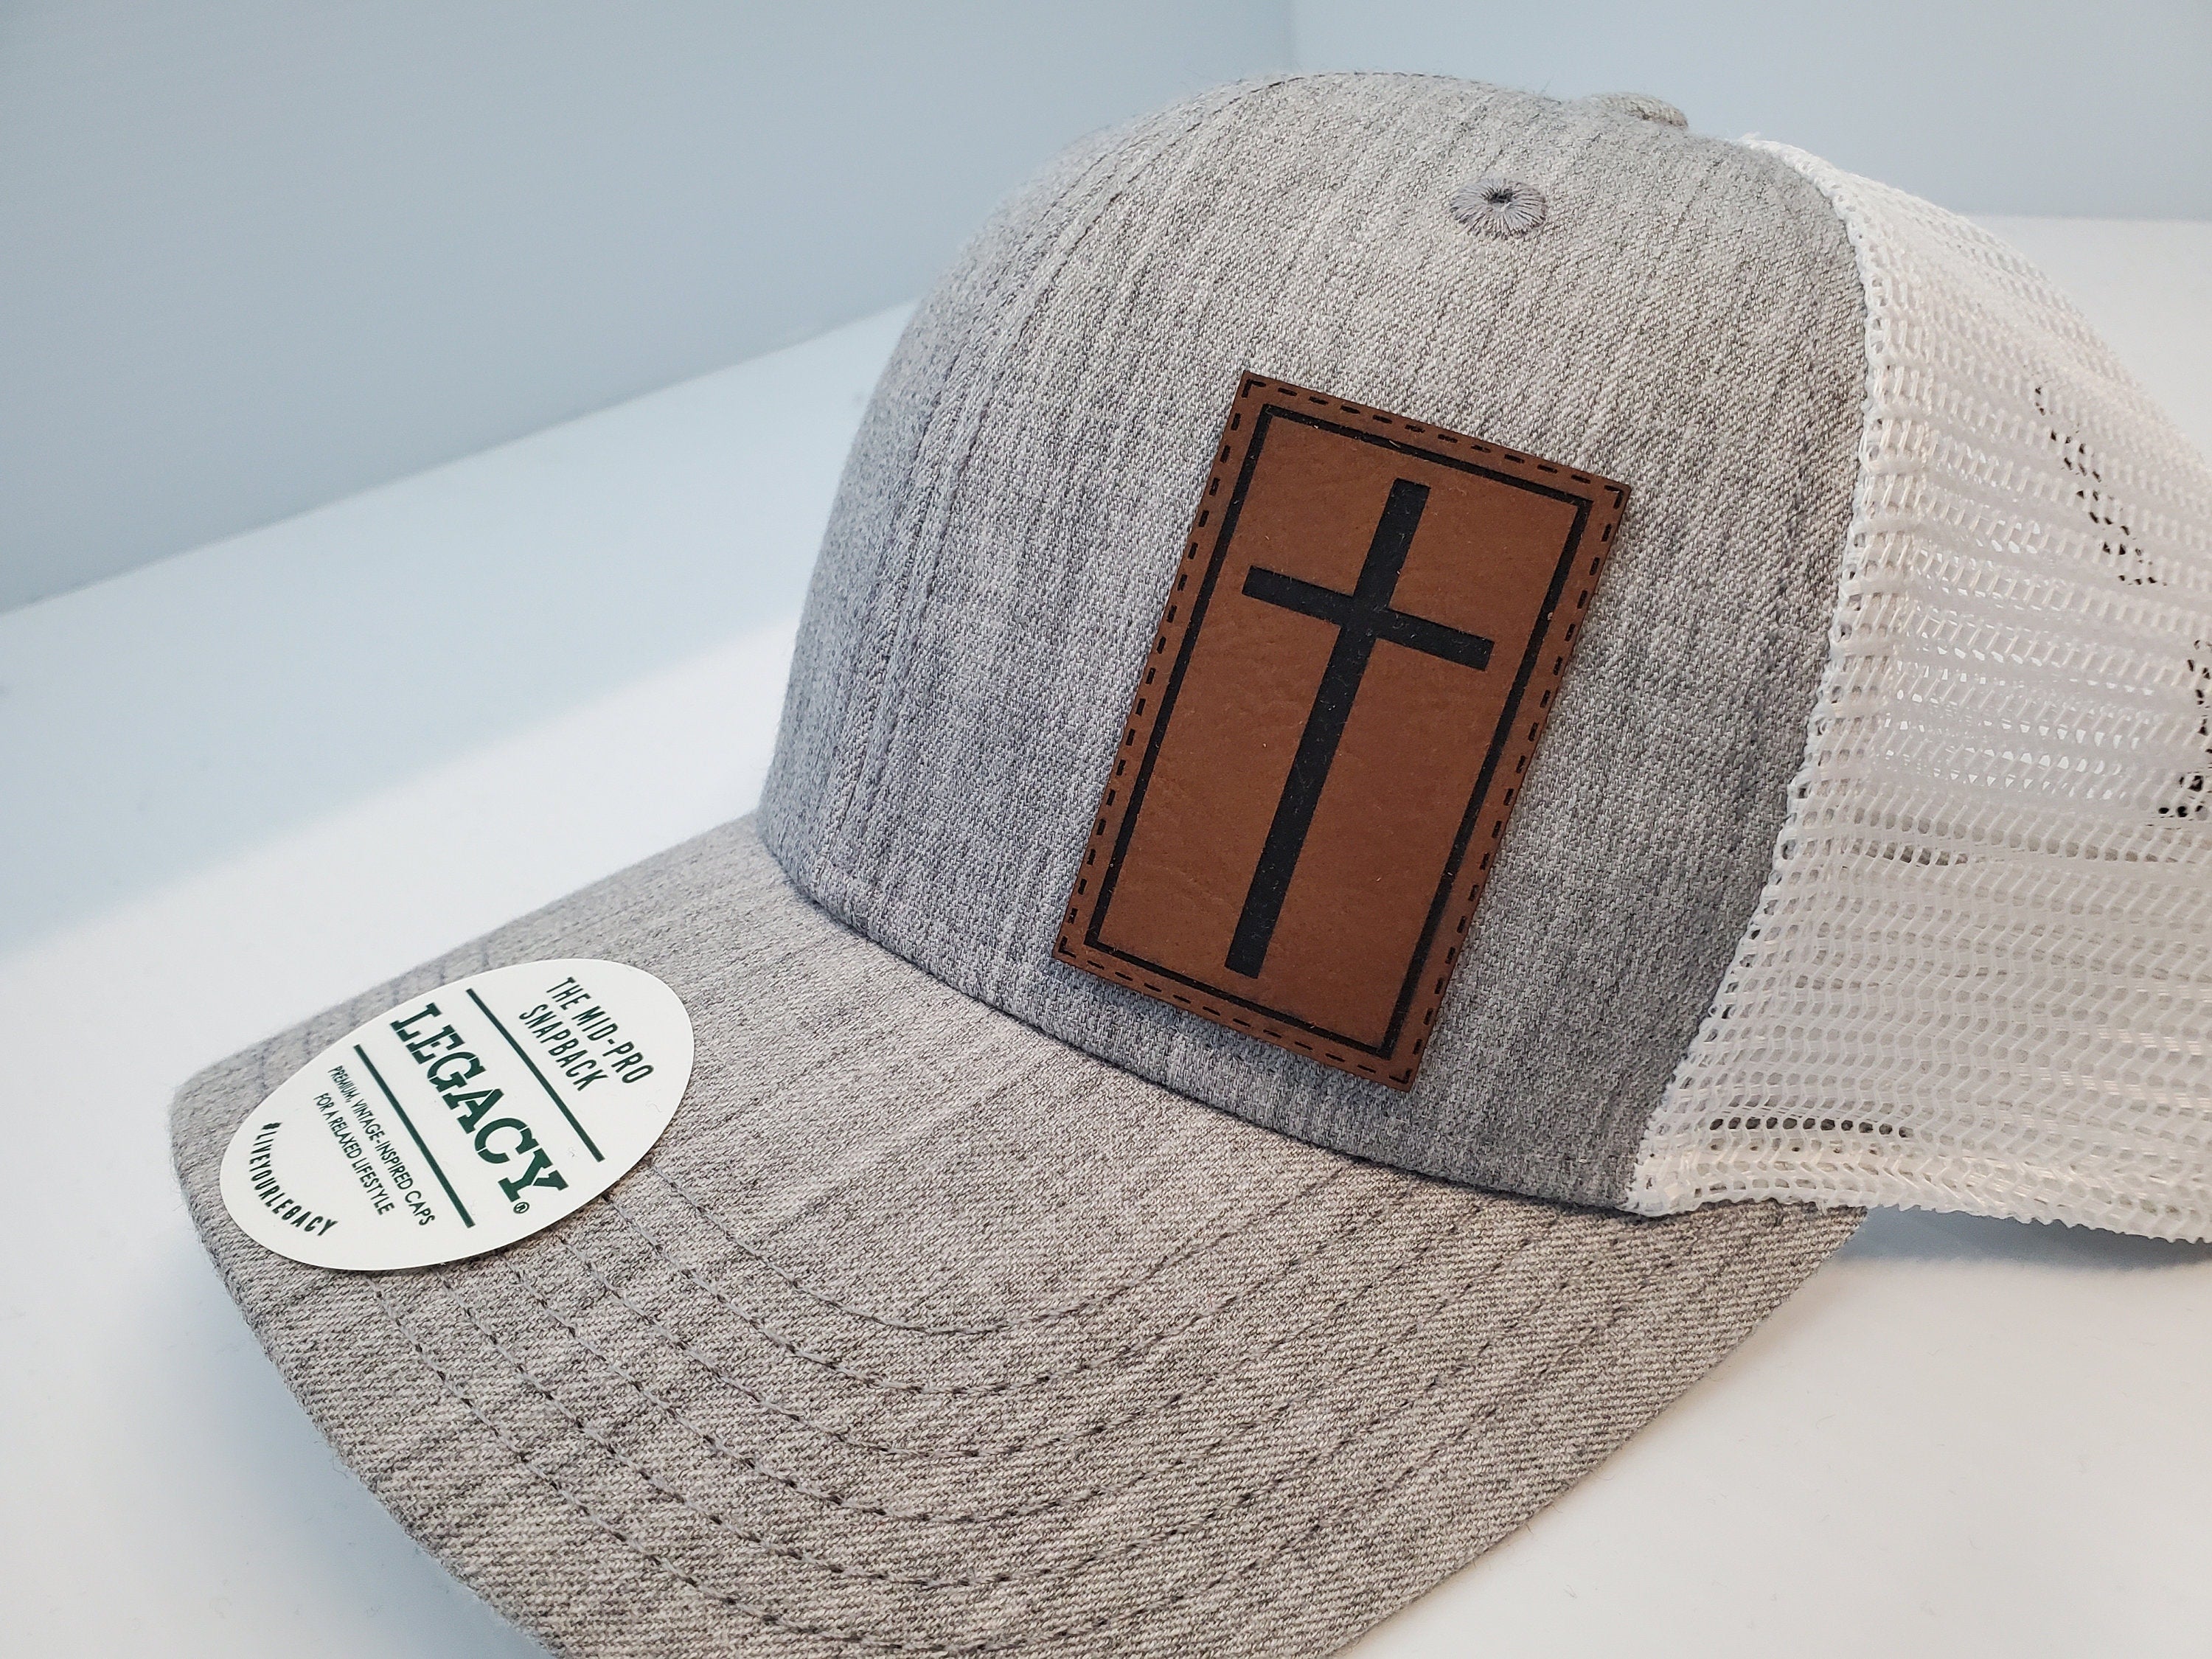 Leather Cross Patch Snapback Hat, Cross Patch, Leather Patch Hat, Custom Hat, Religious hat, Wwjd, God is Good,Custom Hat, religious apparel